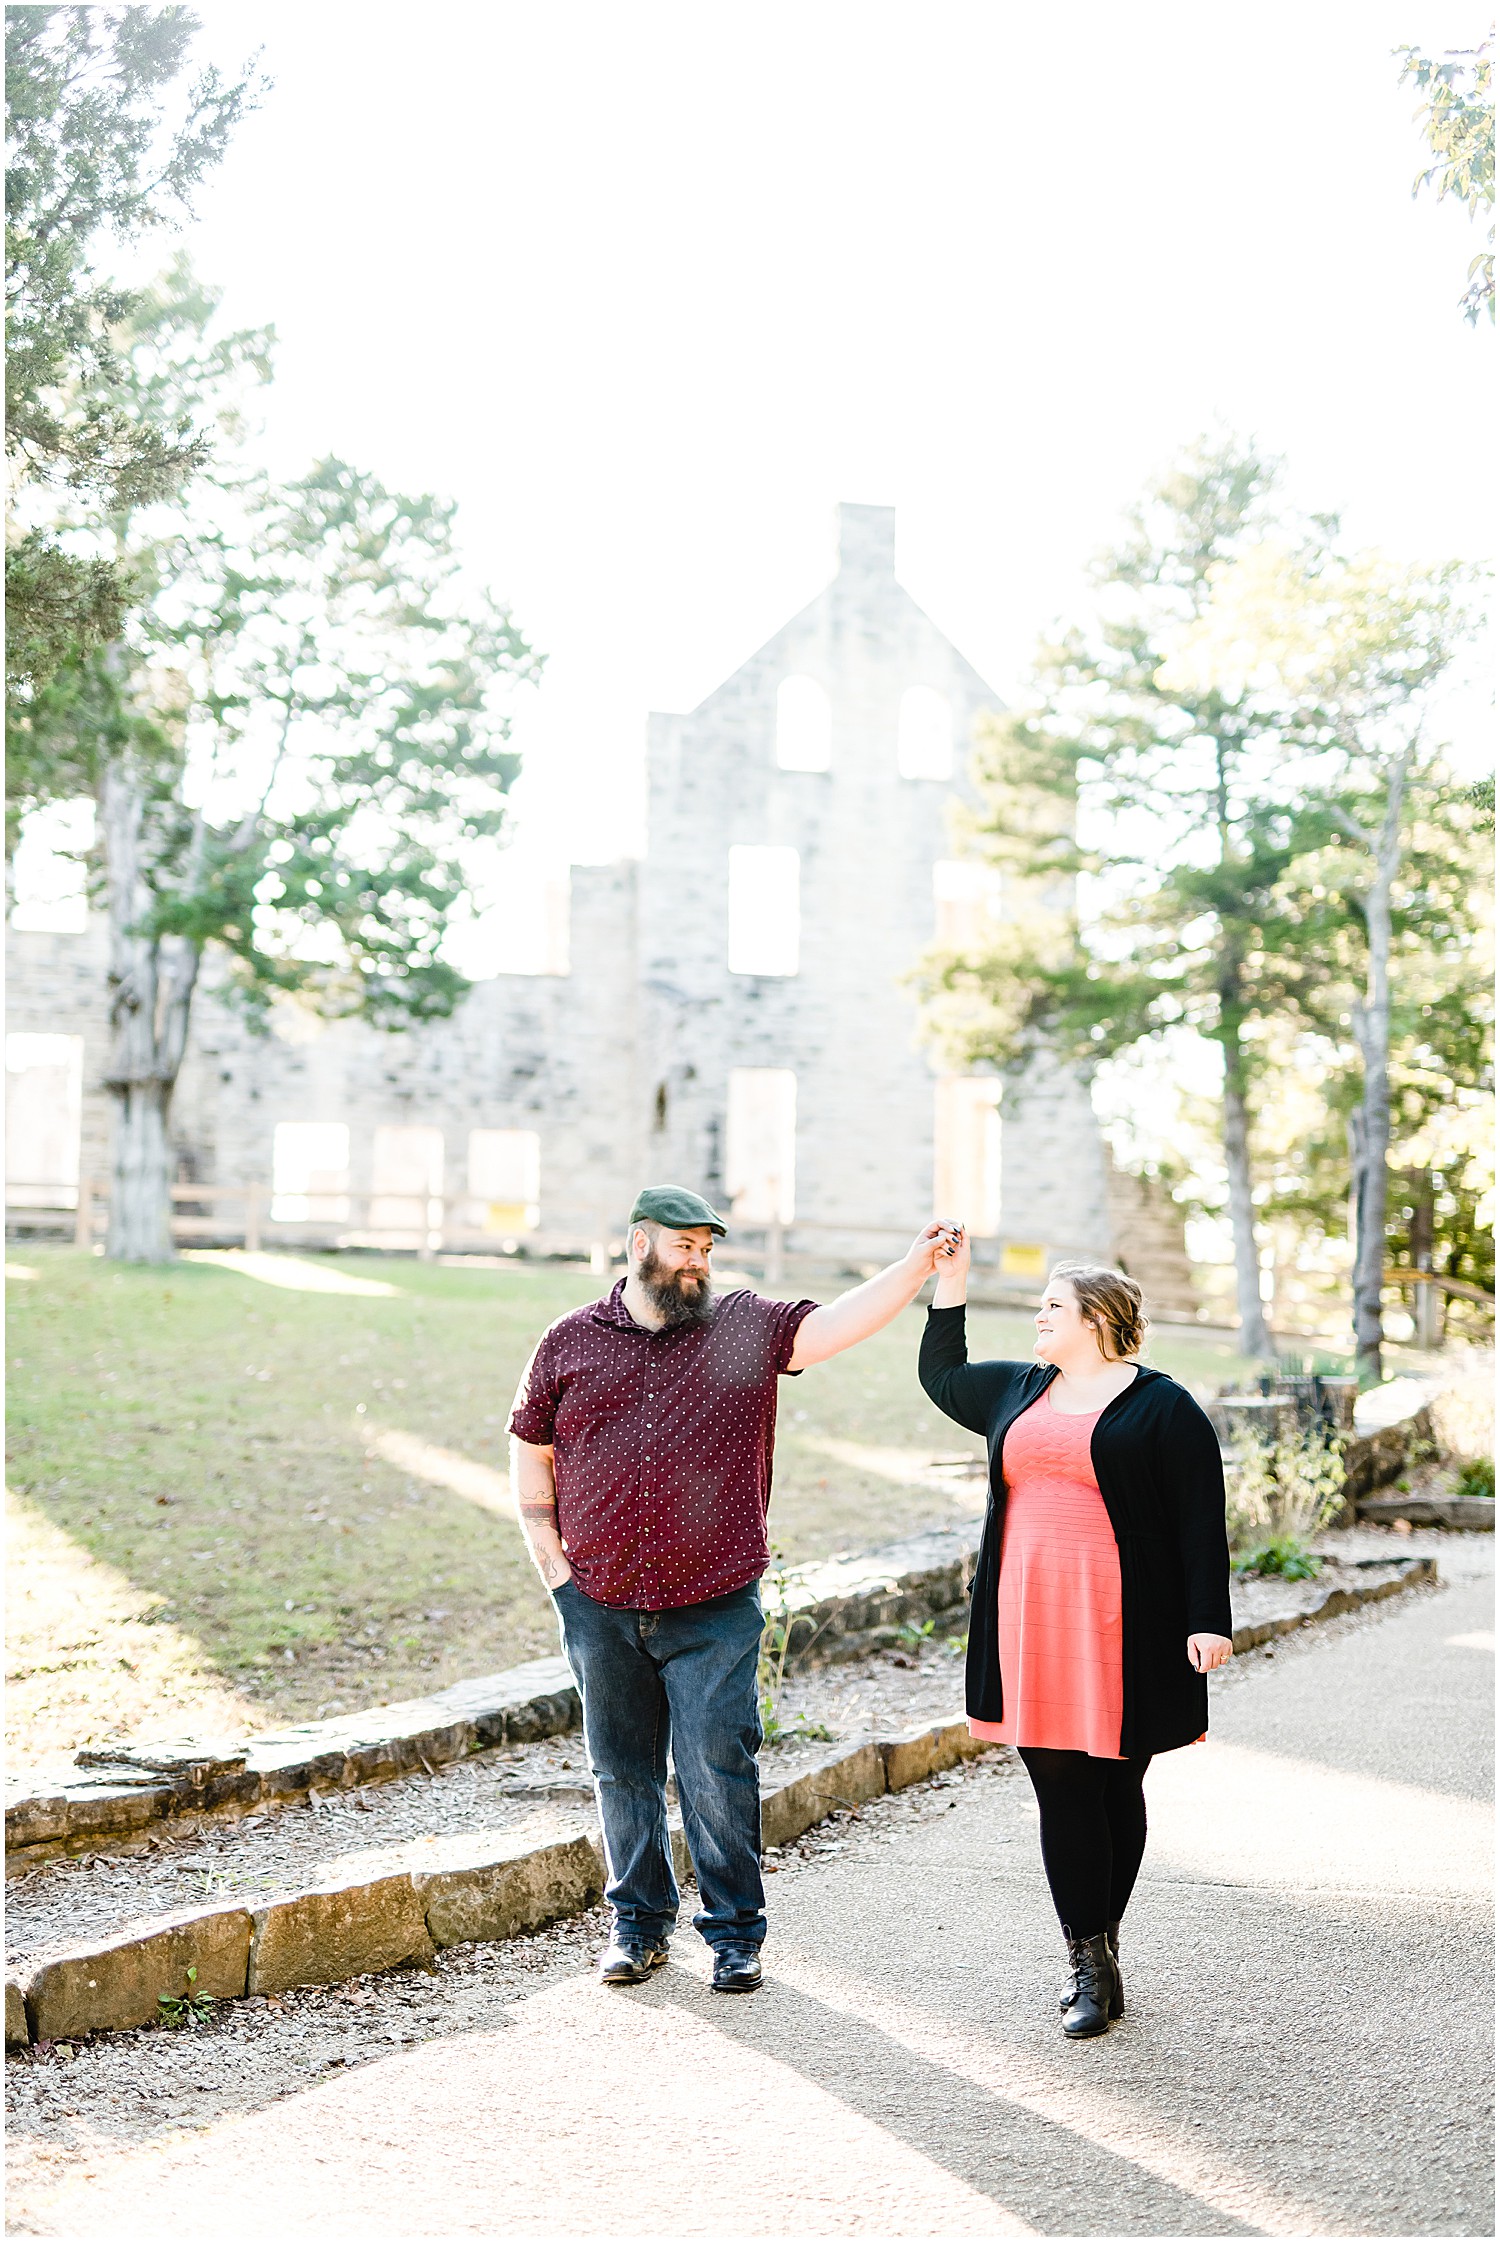 couple dancing on path castle ruins in background ha ha tonka engagement session